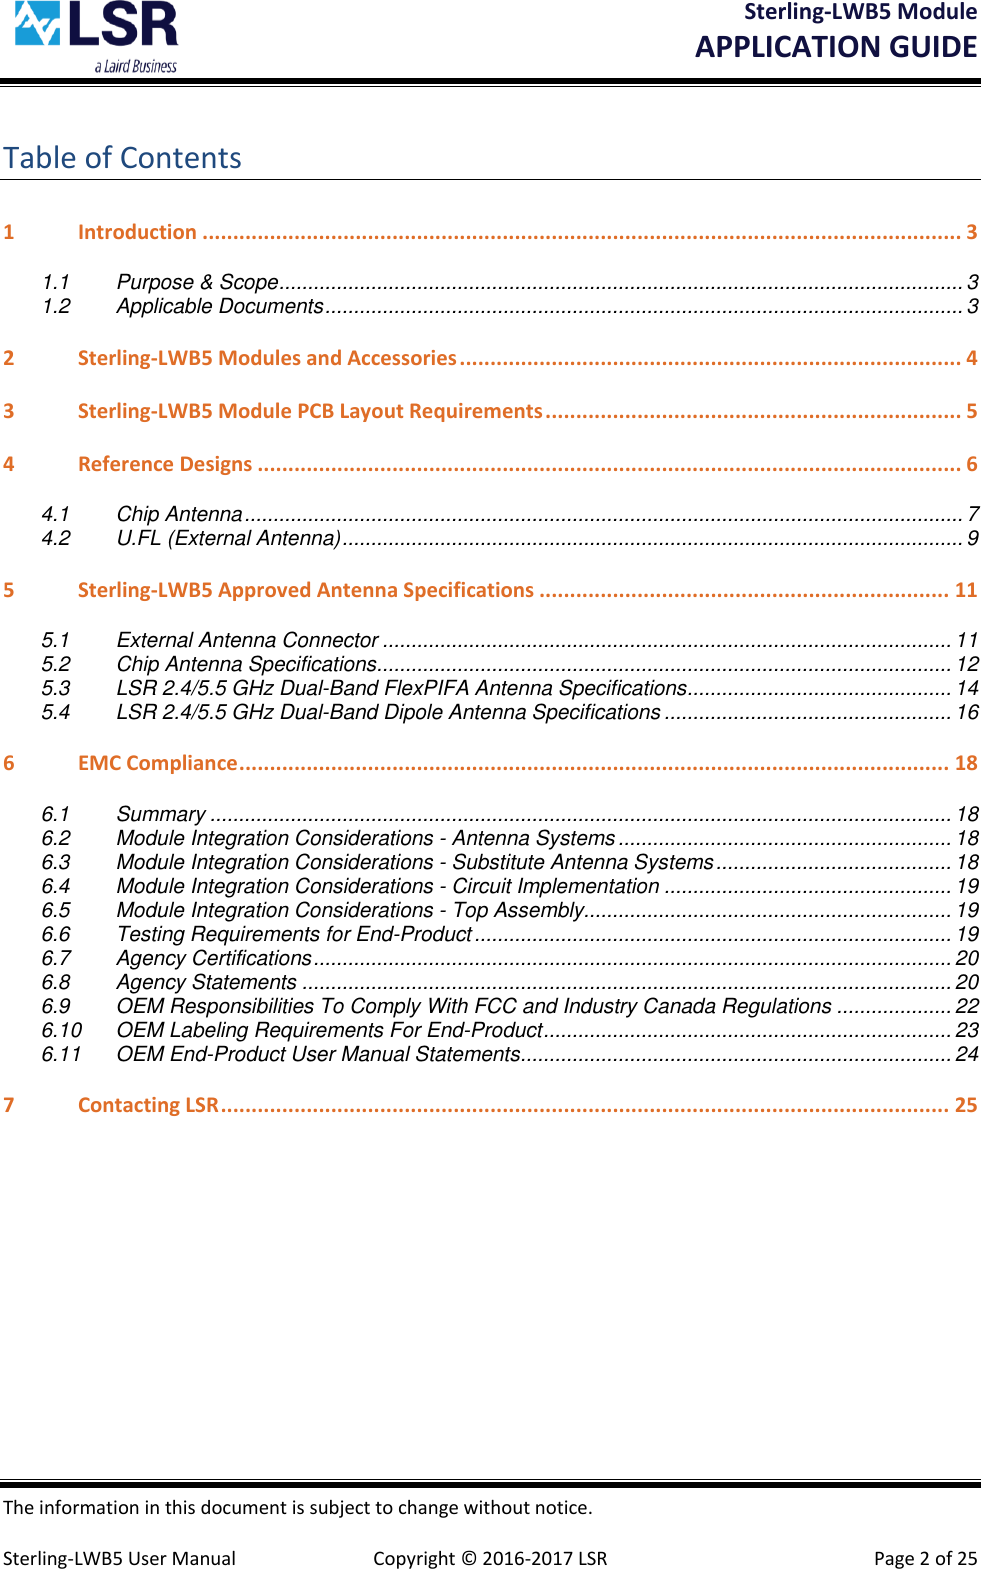 Sterling-LWB5 Module       APPLICATION GUIDE  The information in this document is subject to change without notice.  Sterling-LWB5 User Manual  Copyright © 2016-2017 LSR  Page 2 of 25 Table of Contents 1 Introduction ............................................................................................................................ 3 1.1 Purpose &amp; Scope ....................................................................................................................... 3 1.2 Applicable Documents ............................................................................................................... 3 2 Sterling-LWB5 Modules and Accessories .................................................................................. 4 3 Sterling-LWB5 Module PCB Layout Requirements .................................................................... 5 4 Reference Designs ................................................................................................................... 6 4.1 Chip Antenna ............................................................................................................................. 7 4.2 U.FL (External Antenna) ............................................................................................................ 9 5 Sterling-LWB5 Approved Antenna Specifications ................................................................... 11 5.1 External Antenna Connector ................................................................................................... 11 5.2 Chip Antenna Specifications .................................................................................................... 12 5.3 LSR 2.4/5.5 GHz Dual-Band FlexPIFA Antenna Specifications .............................................. 14 5.4 LSR 2.4/5.5 GHz Dual-Band Dipole Antenna Specifications .................................................. 16 6 EMC Compliance .................................................................................................................... 18 6.1 Summary ................................................................................................................................. 18 6.2 Module Integration Considerations - Antenna Systems .......................................................... 18 6.3 Module Integration Considerations - Substitute Antenna Systems ......................................... 18 6.4 Module Integration Considerations - Circuit Implementation .................................................. 19 6.5 Module Integration Considerations - Top Assembly................................................................ 19 6.6 Testing Requirements for End-Product ................................................................................... 19 6.7 Agency Certifications ............................................................................................................... 20 6.8 Agency Statements ................................................................................................................. 20 6.9 OEM Responsibilities To Comply With FCC and Industry Canada Regulations .................... 22 6.10 OEM Labeling Requirements For End-Product ....................................................................... 23 6.11 OEM End-Product User Manual Statements ........................................................................... 24 7 Contacting LSR ....................................................................................................................... 25    